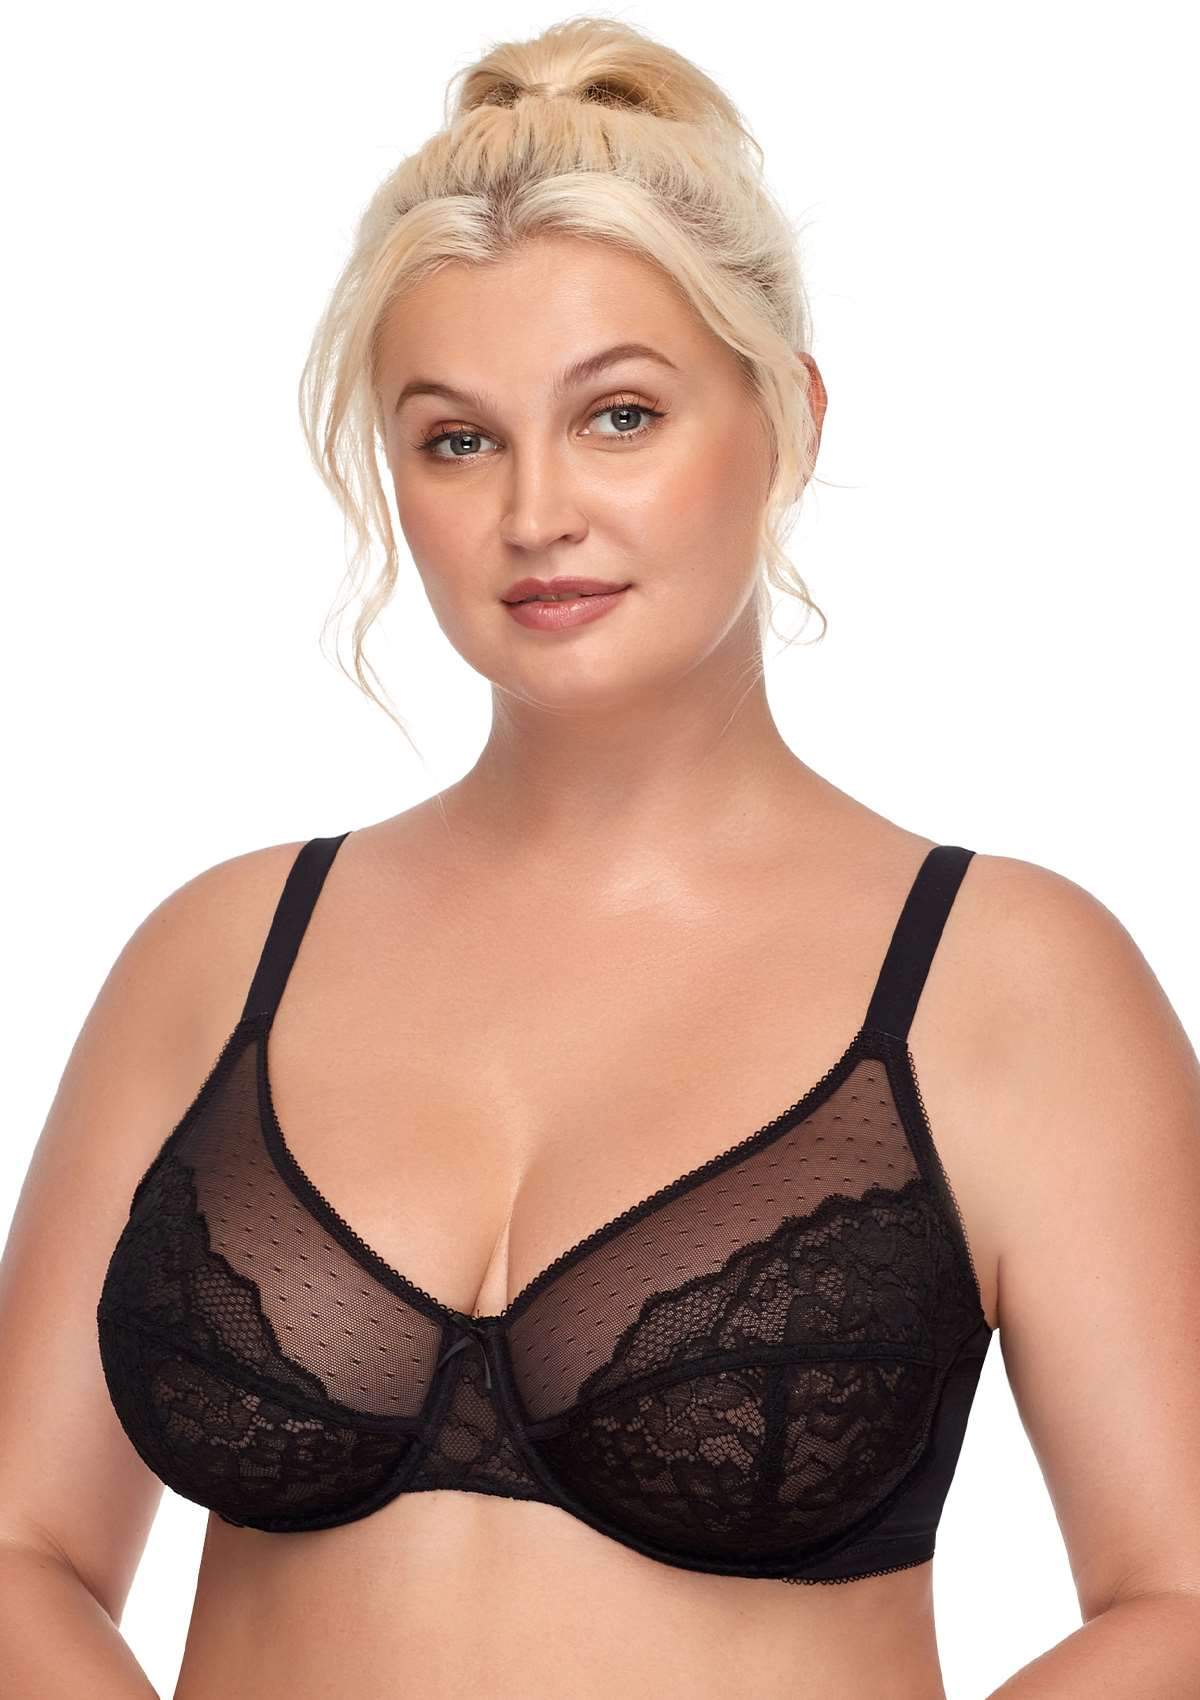 HSIA Enchante Lace Wire Bra For Lifting And Separating Large Breasts - Black / 44 / DD/E